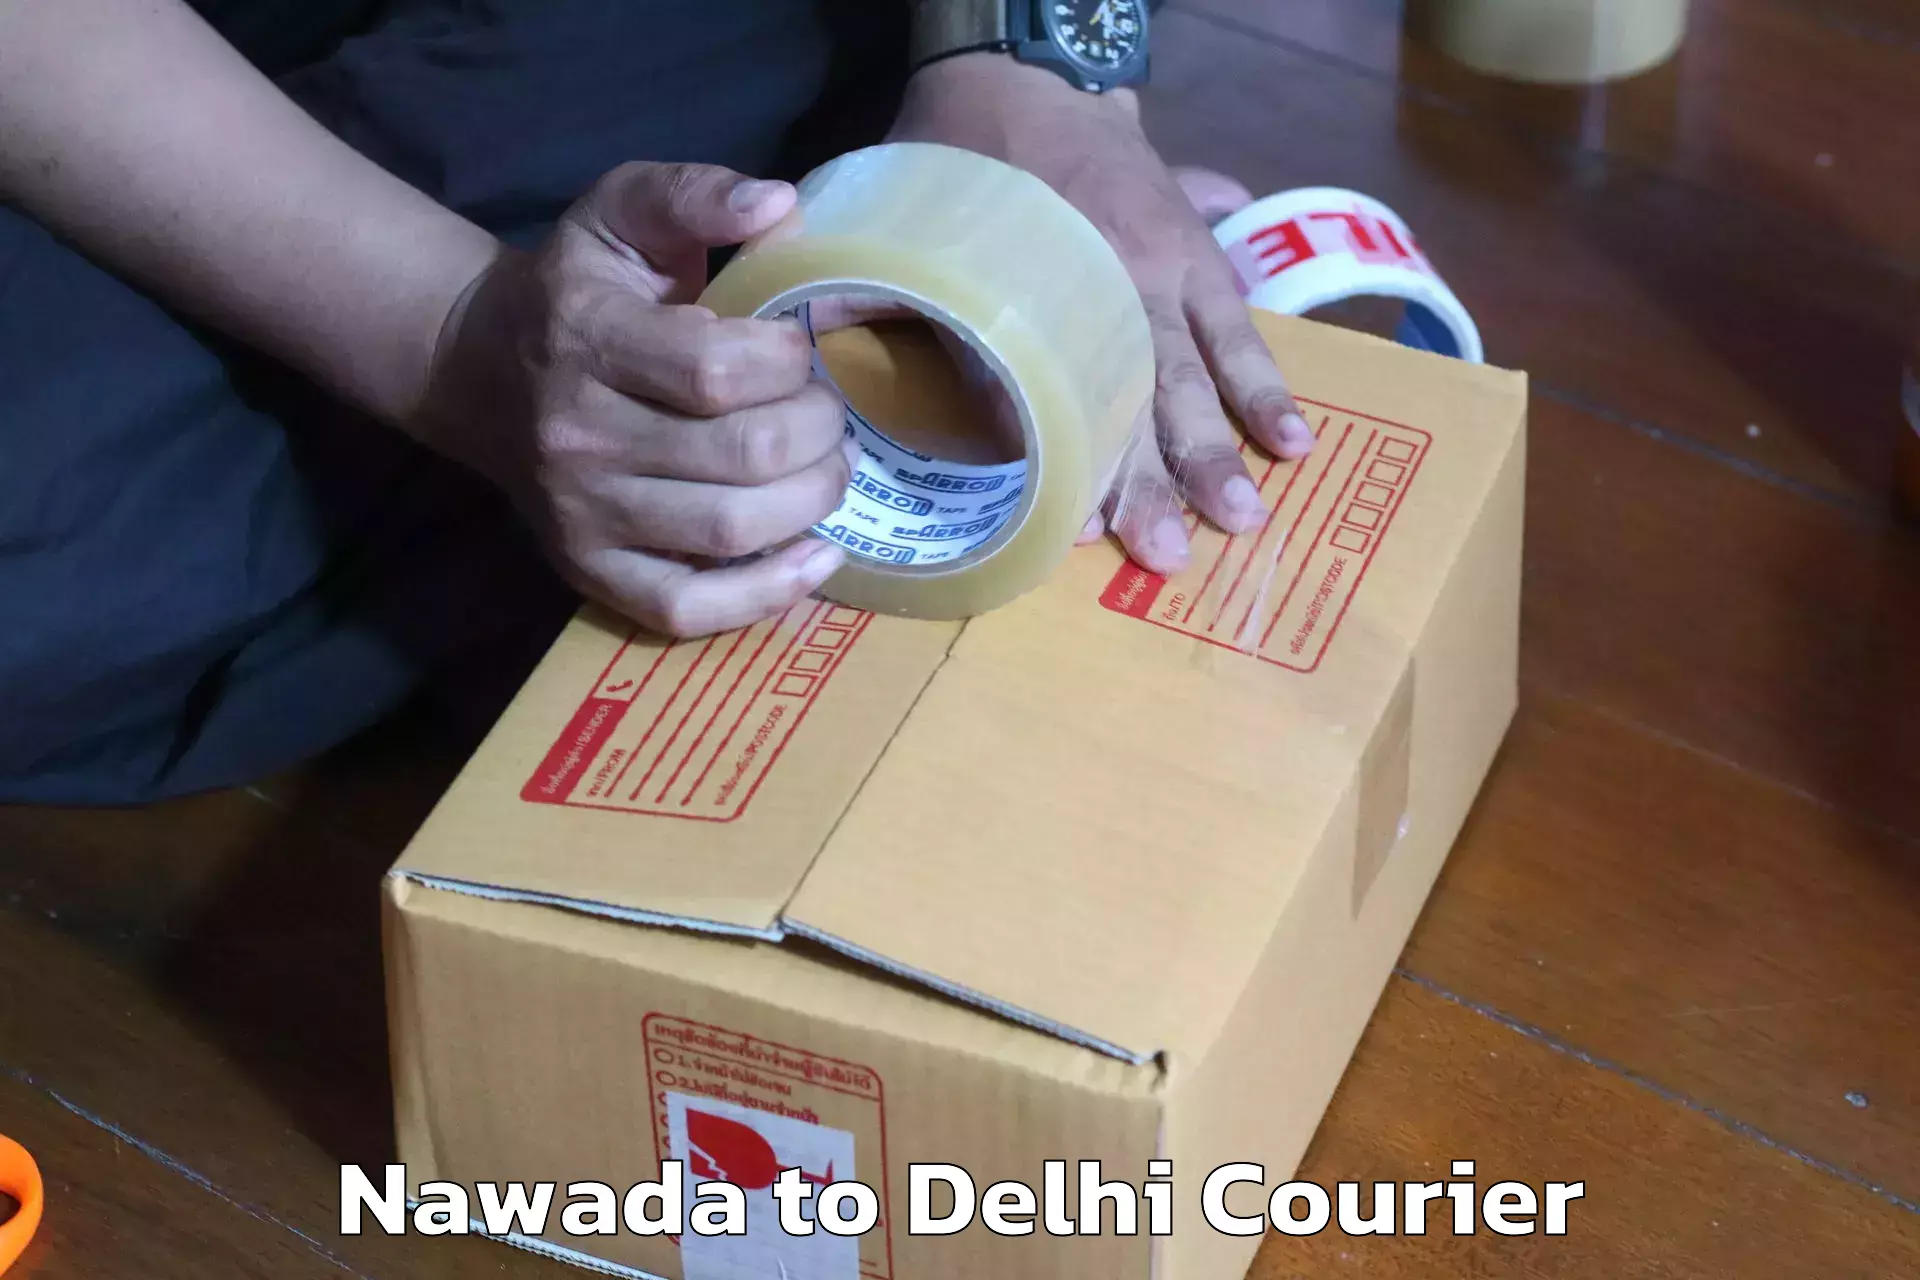 Furniture moving specialists Nawada to Lodhi Road